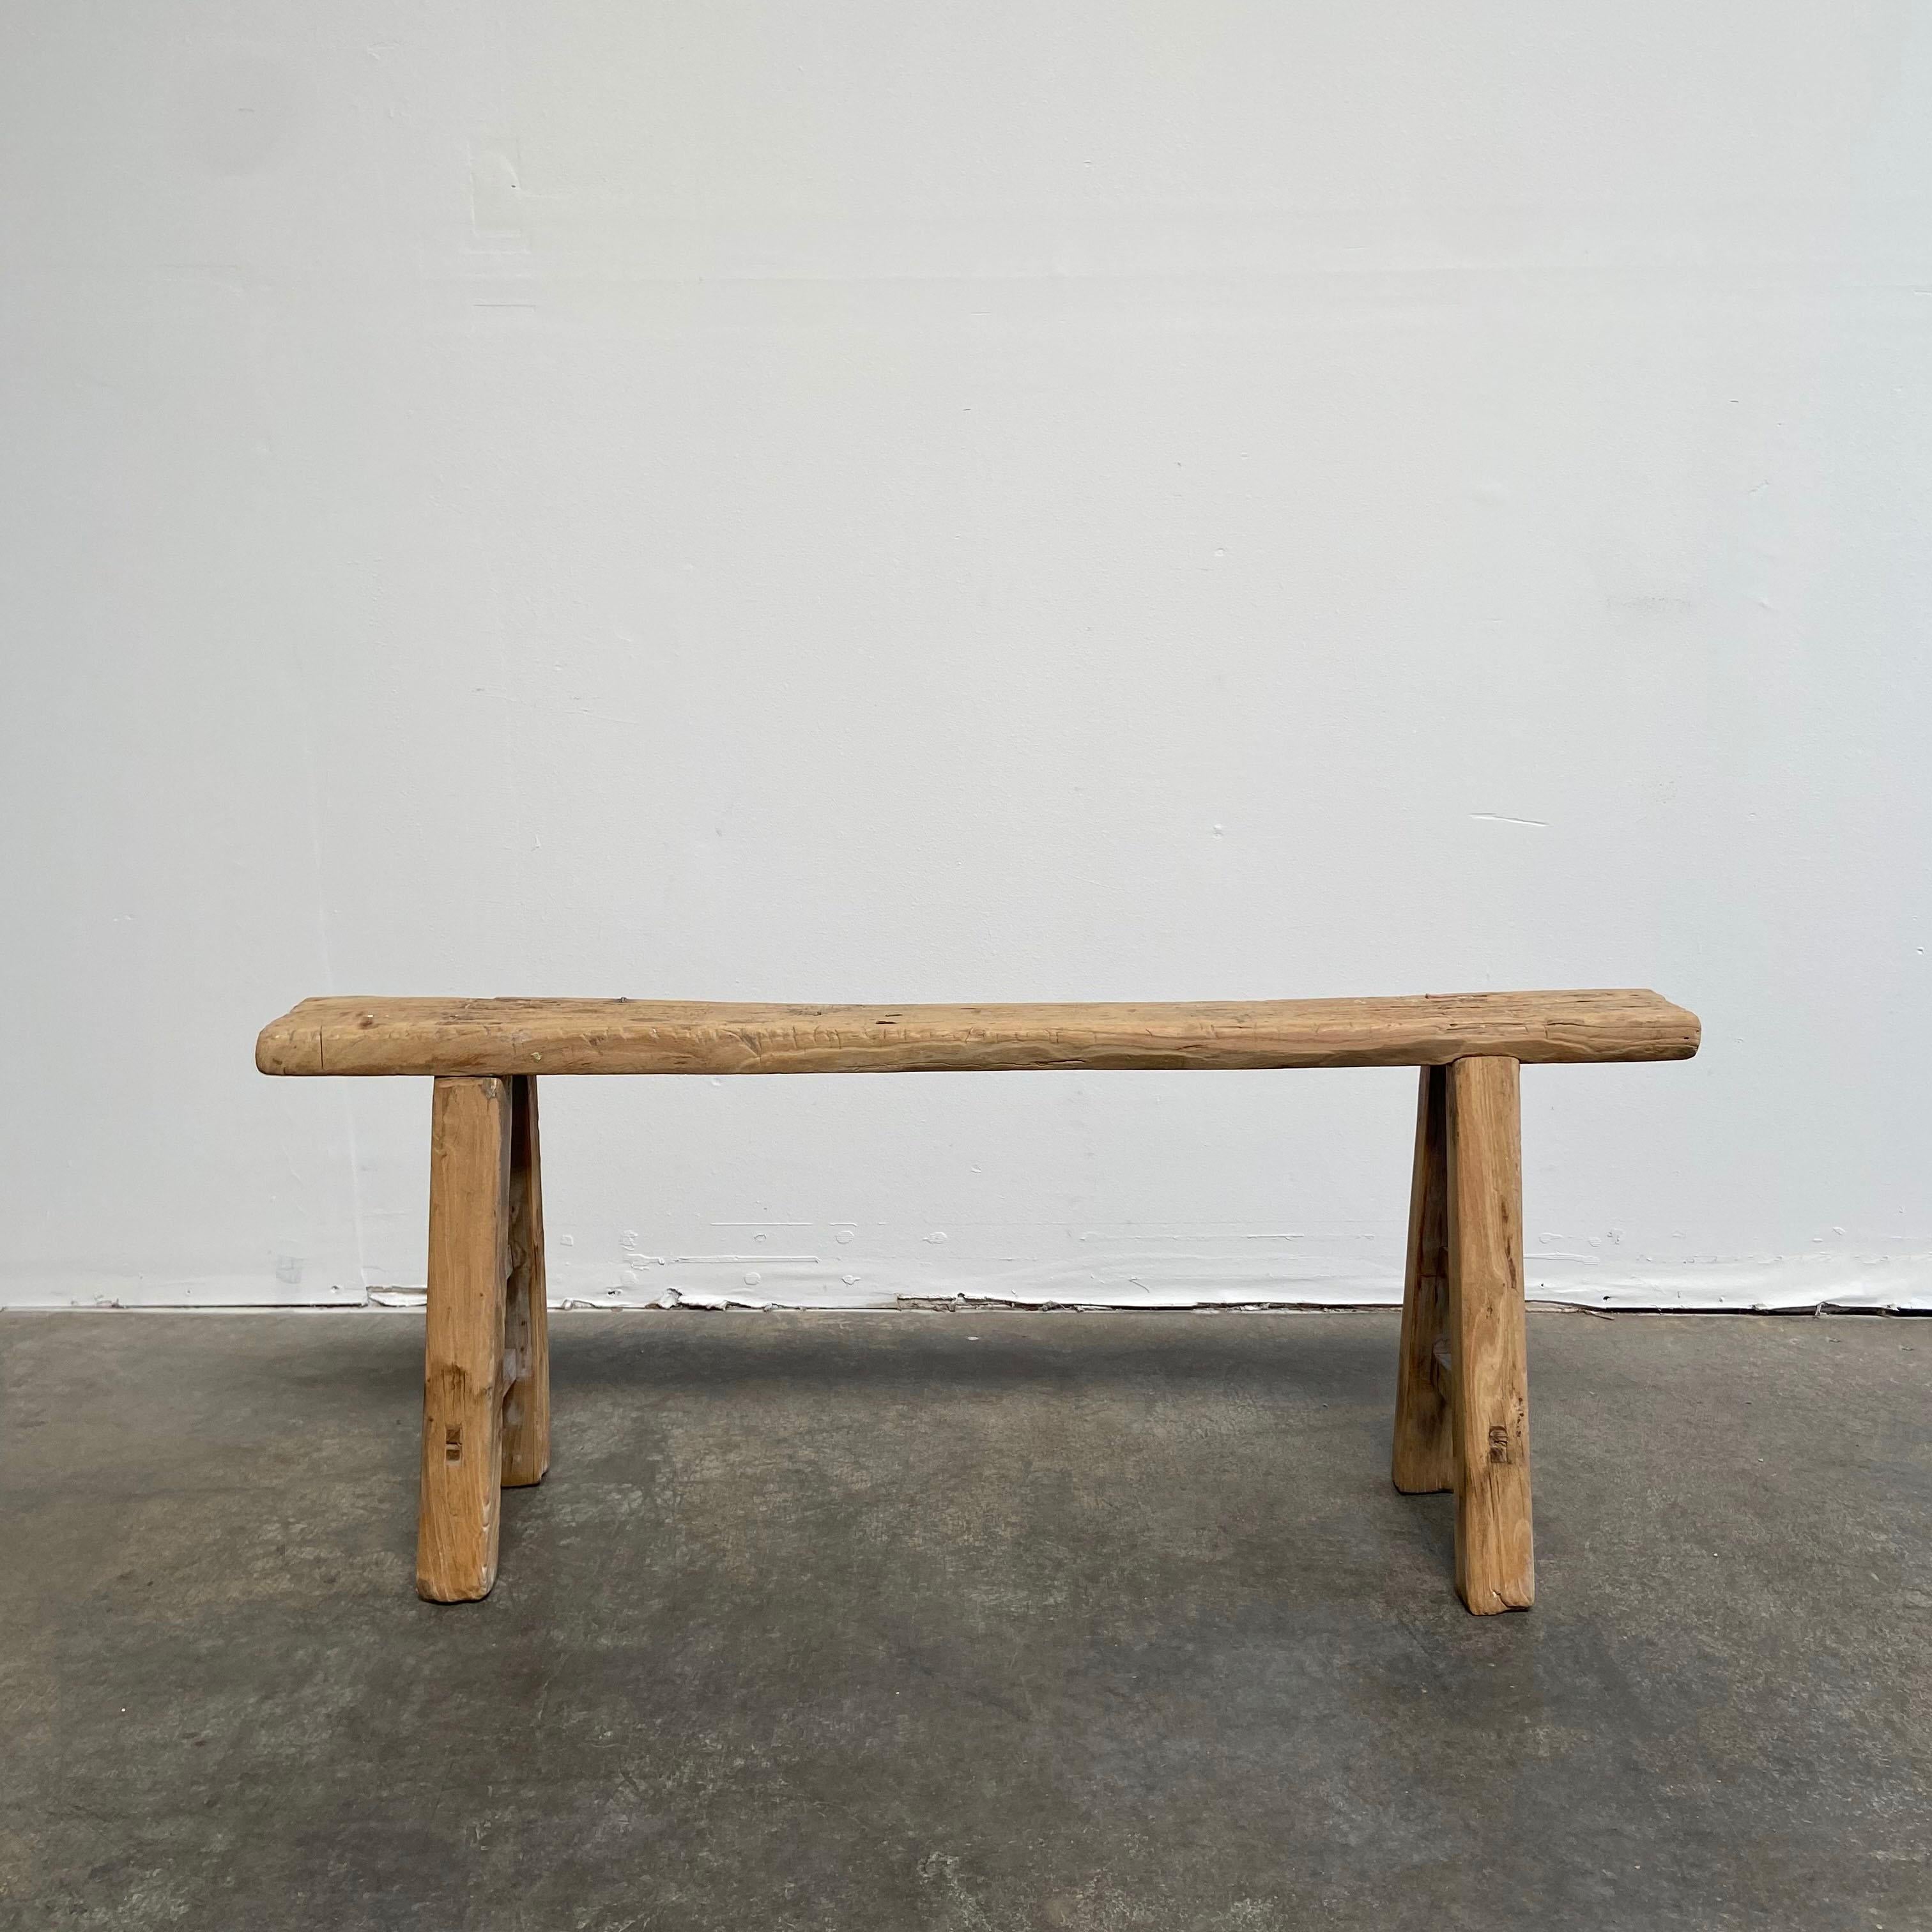 Vintage antique elm wood skinny bench
These are the real vintage antique elm wood benches! Beautiful antique patina, with weathering and age, these are solid and sturdy ready for daily use, use as as a table behind a sofa, stool, coffee table, they